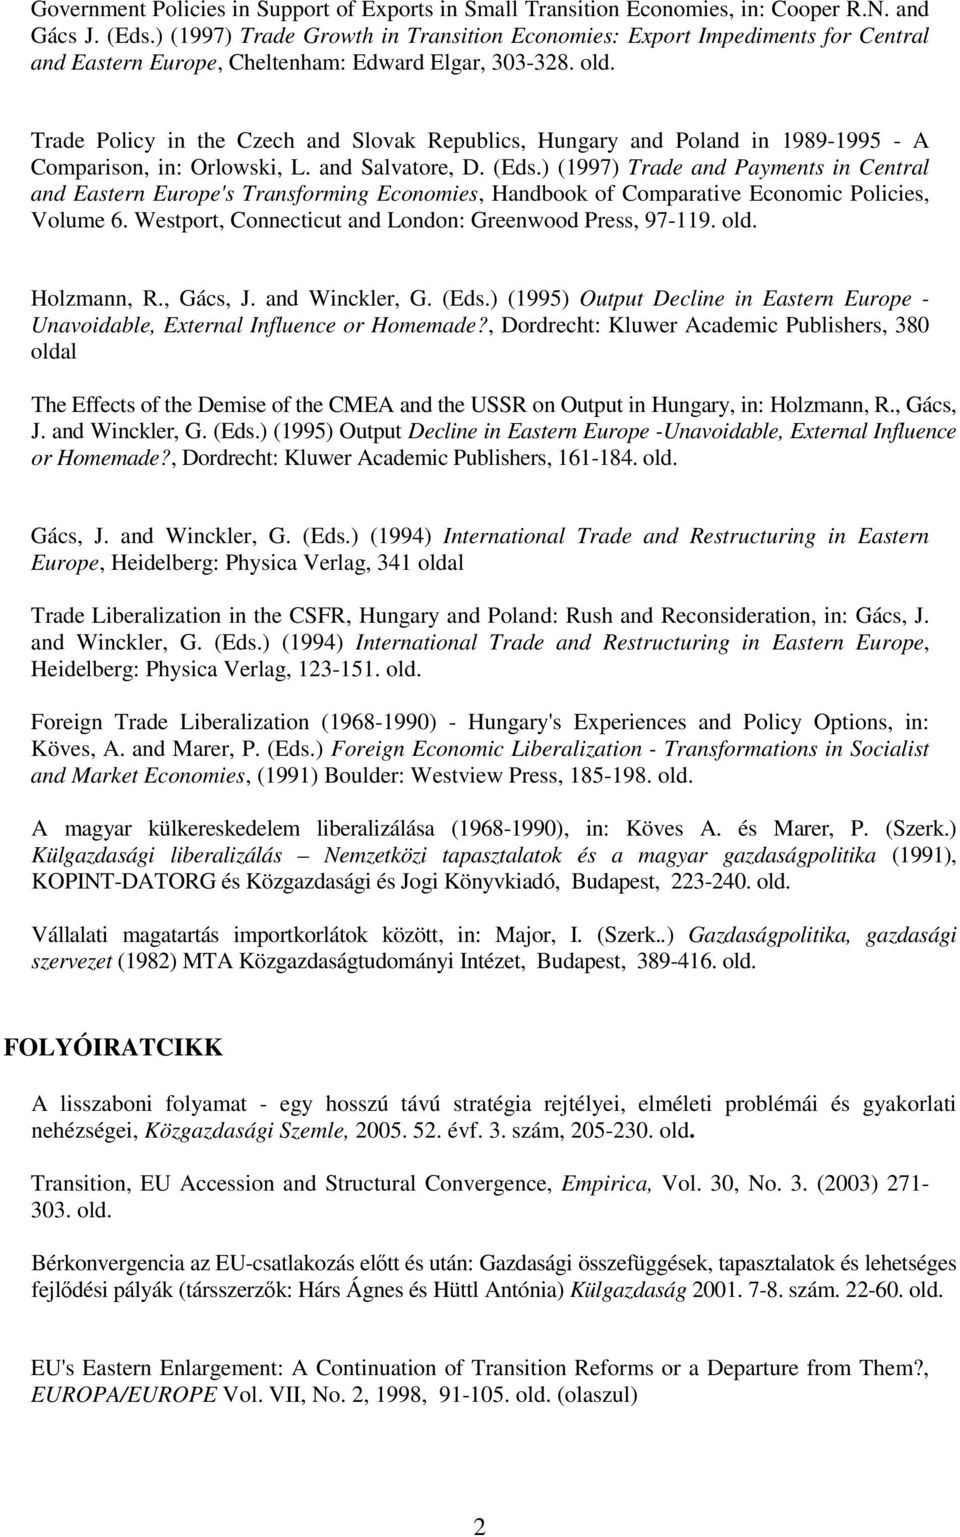 Trade Policy in the Czech and Slovak Republics, Hungary and Poland in 1989-1995 - A Comparison, in: Orlowski, L. and Salvatore, D. (Eds.